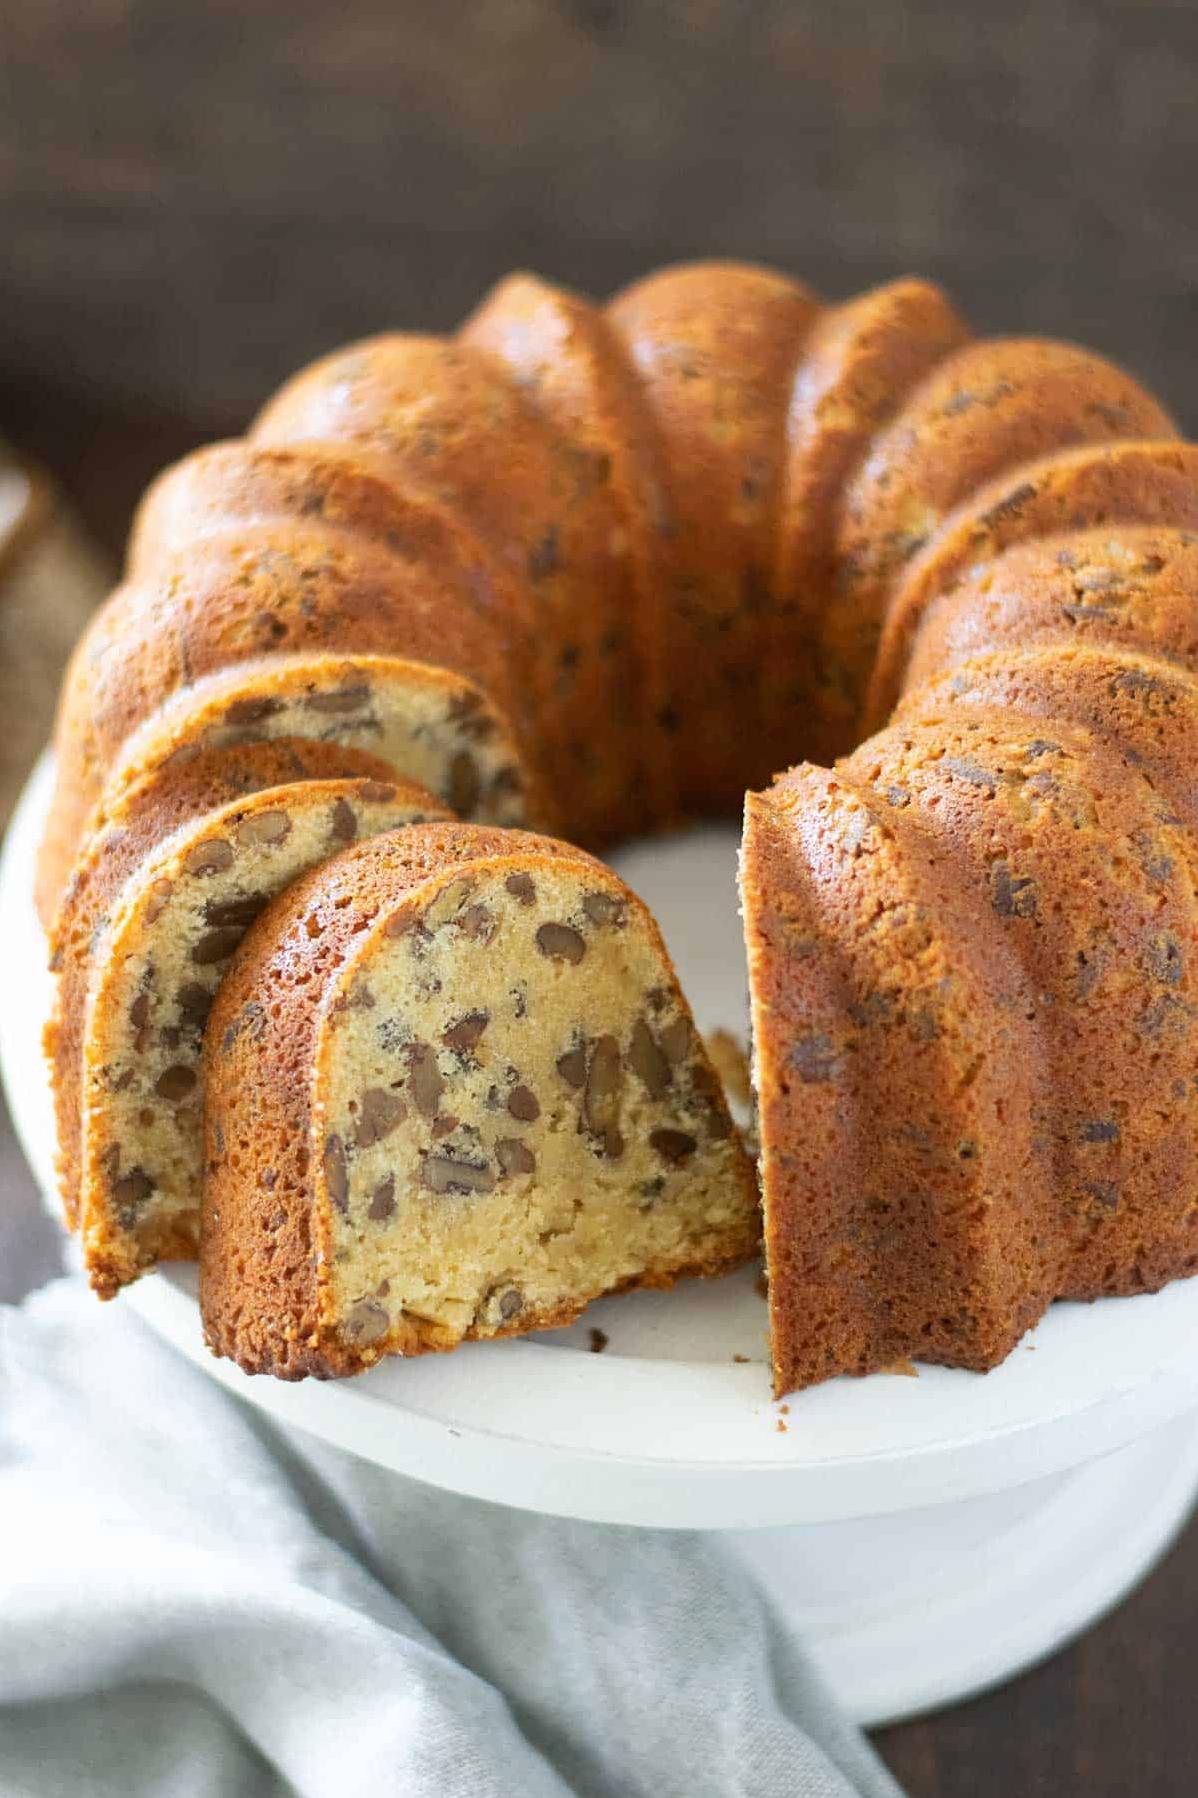  Sink your teeth into this moist and buttery pecan pound cake.